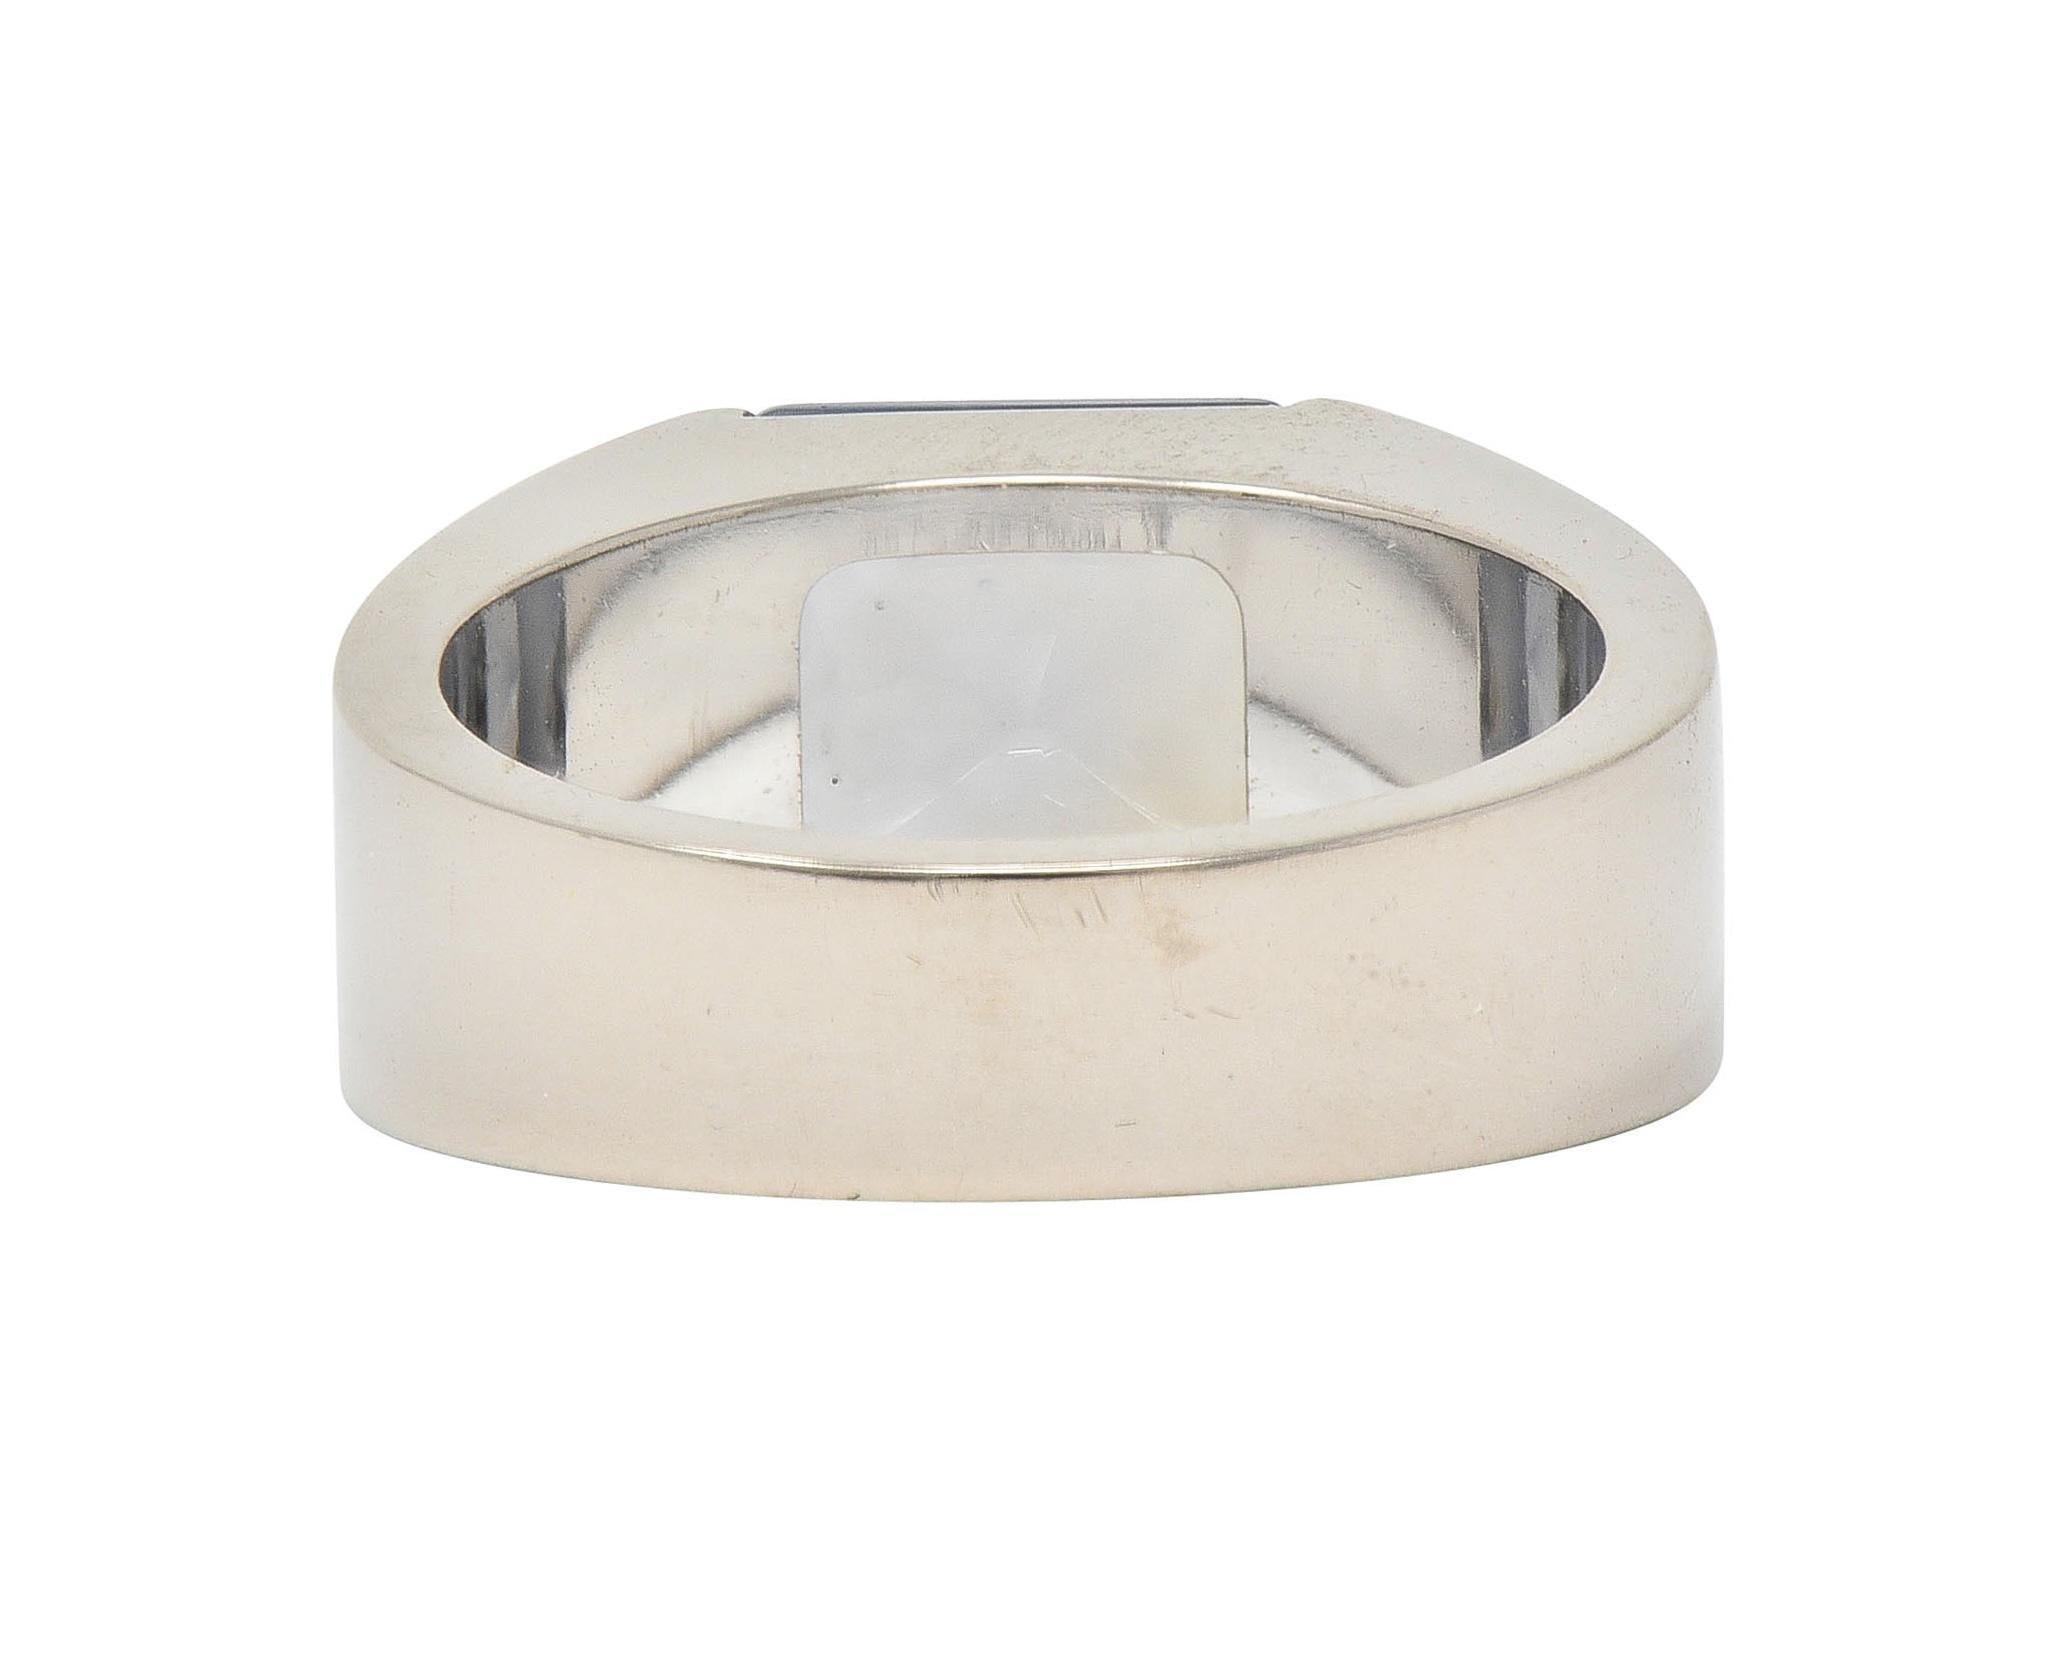 Cartier 2000 Gray Moonstone 18 Karat White Gold Vintage Tank Band Ring In Excellent Condition For Sale In Philadelphia, PA